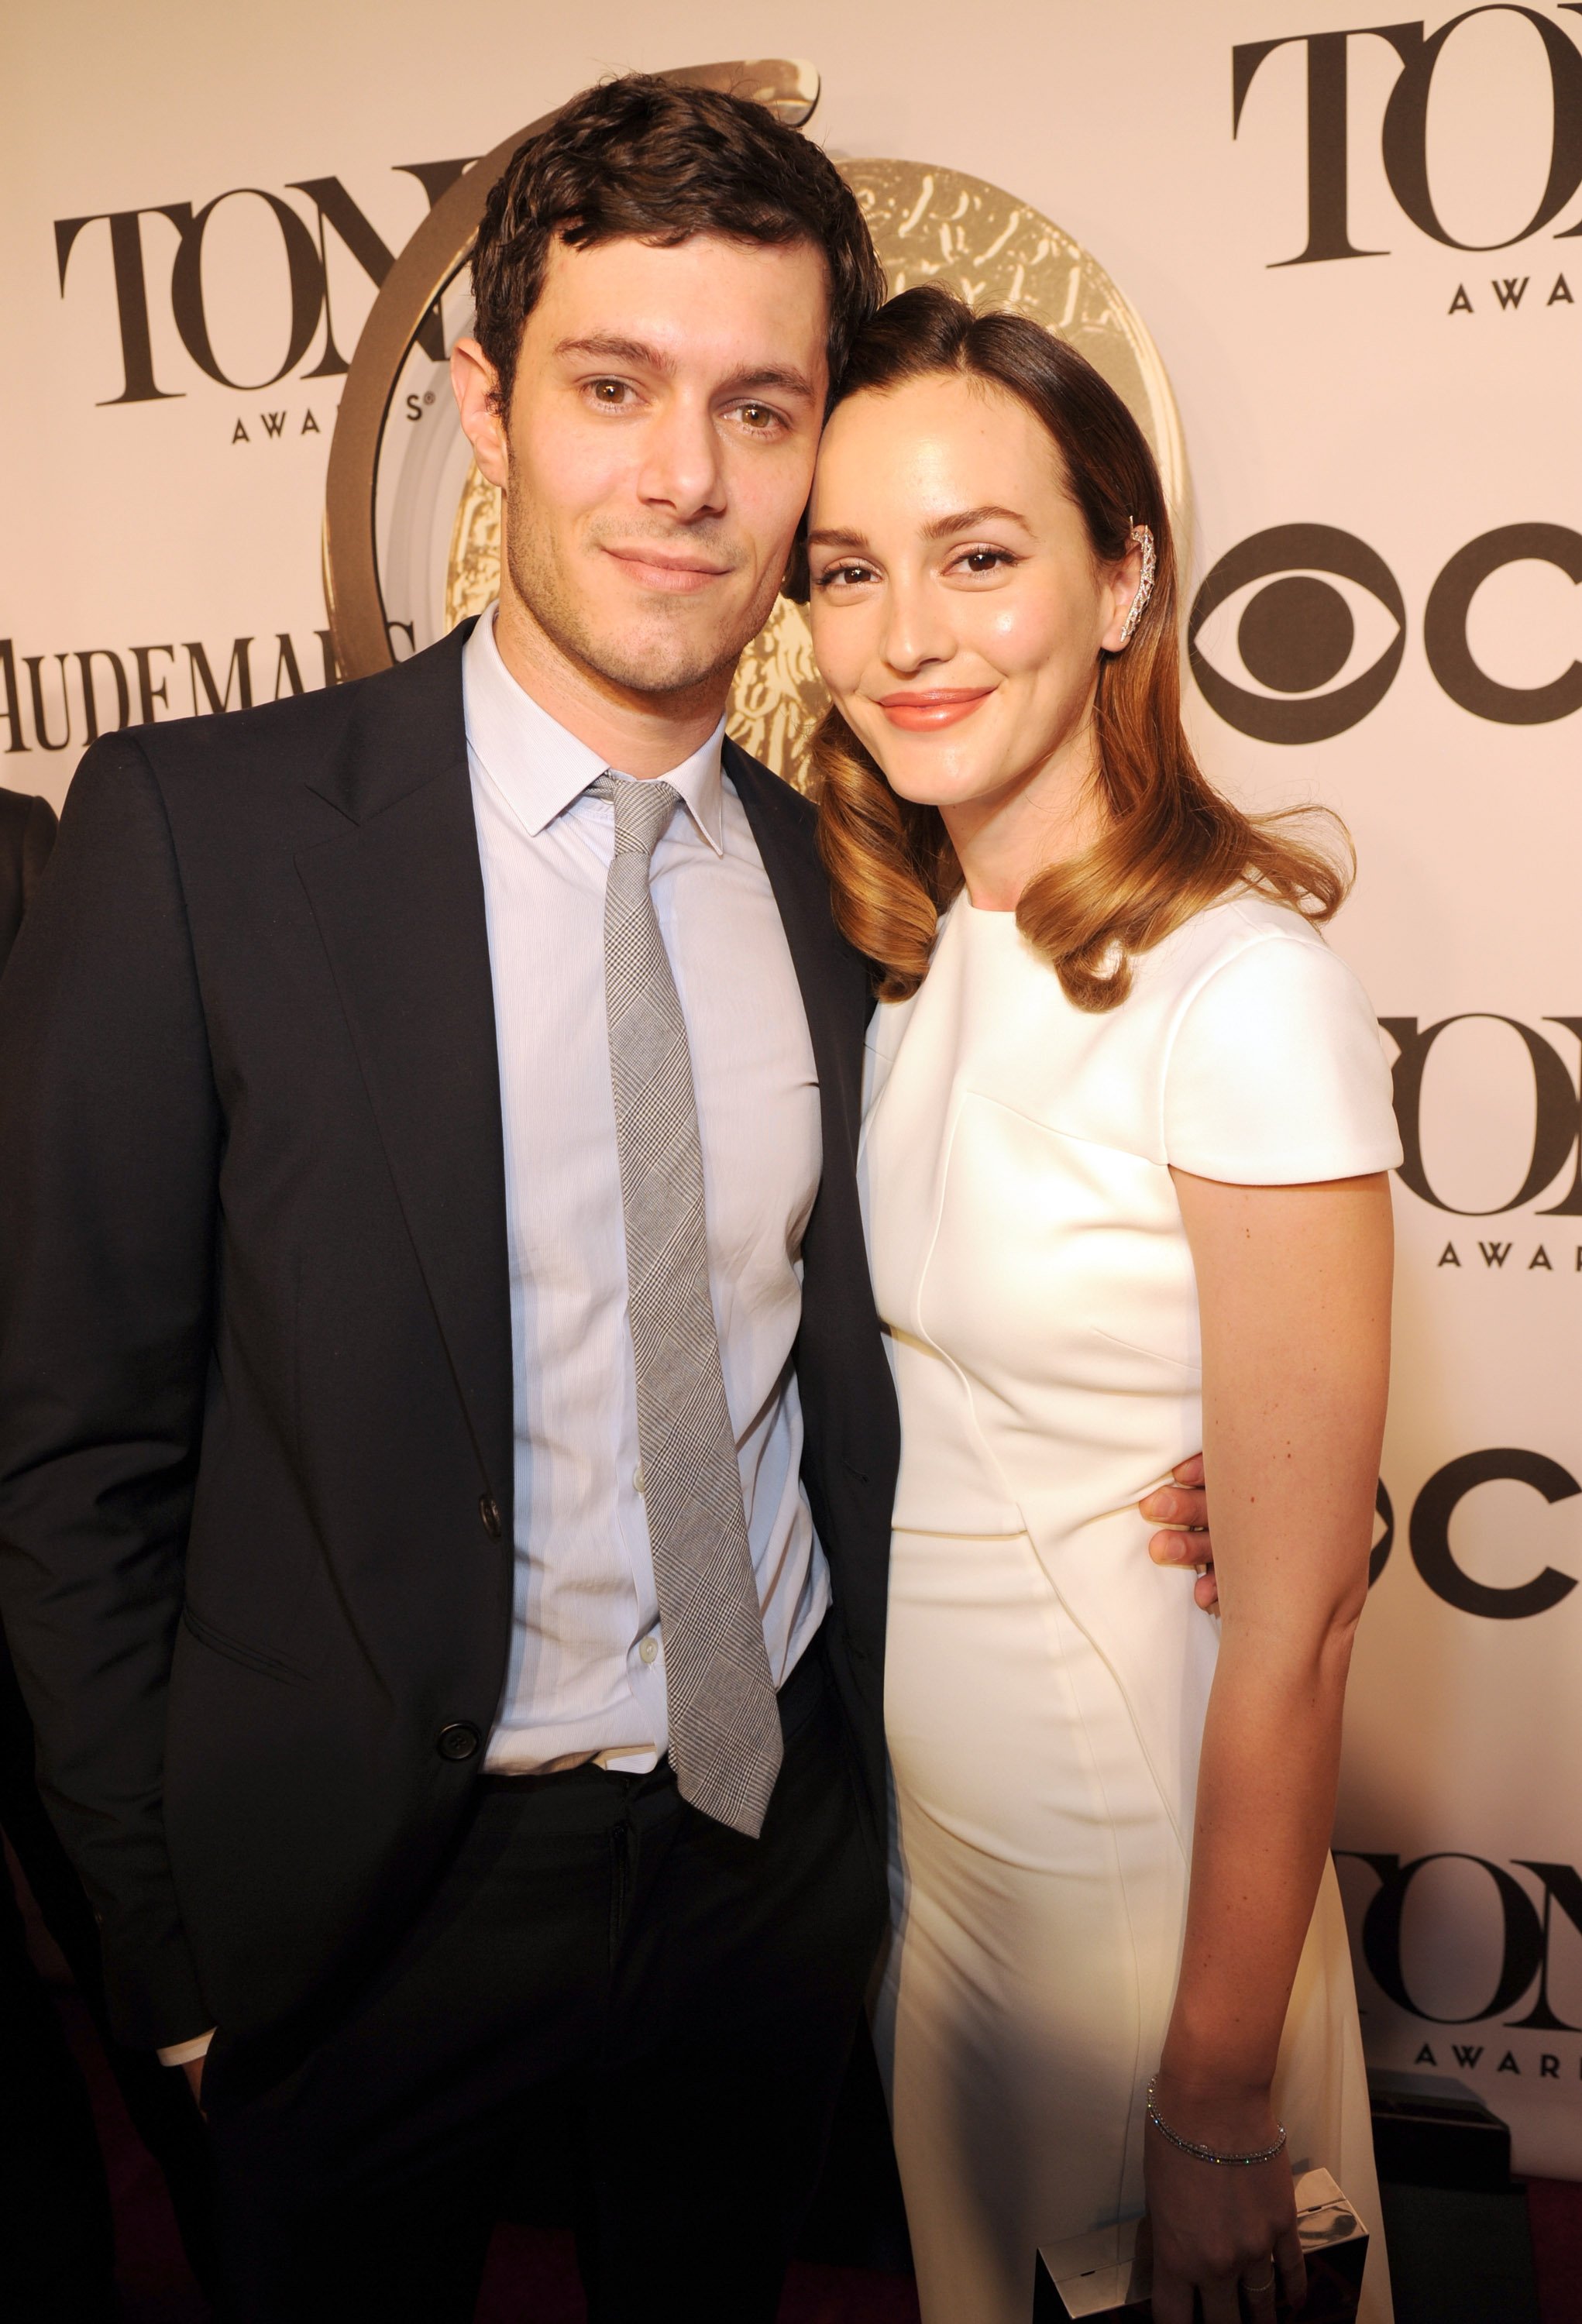 Adam Brody and Leighton Meester attend the 68th Annual Tony Awards in New York City on June 8, 2014 | Photo: Getty Images